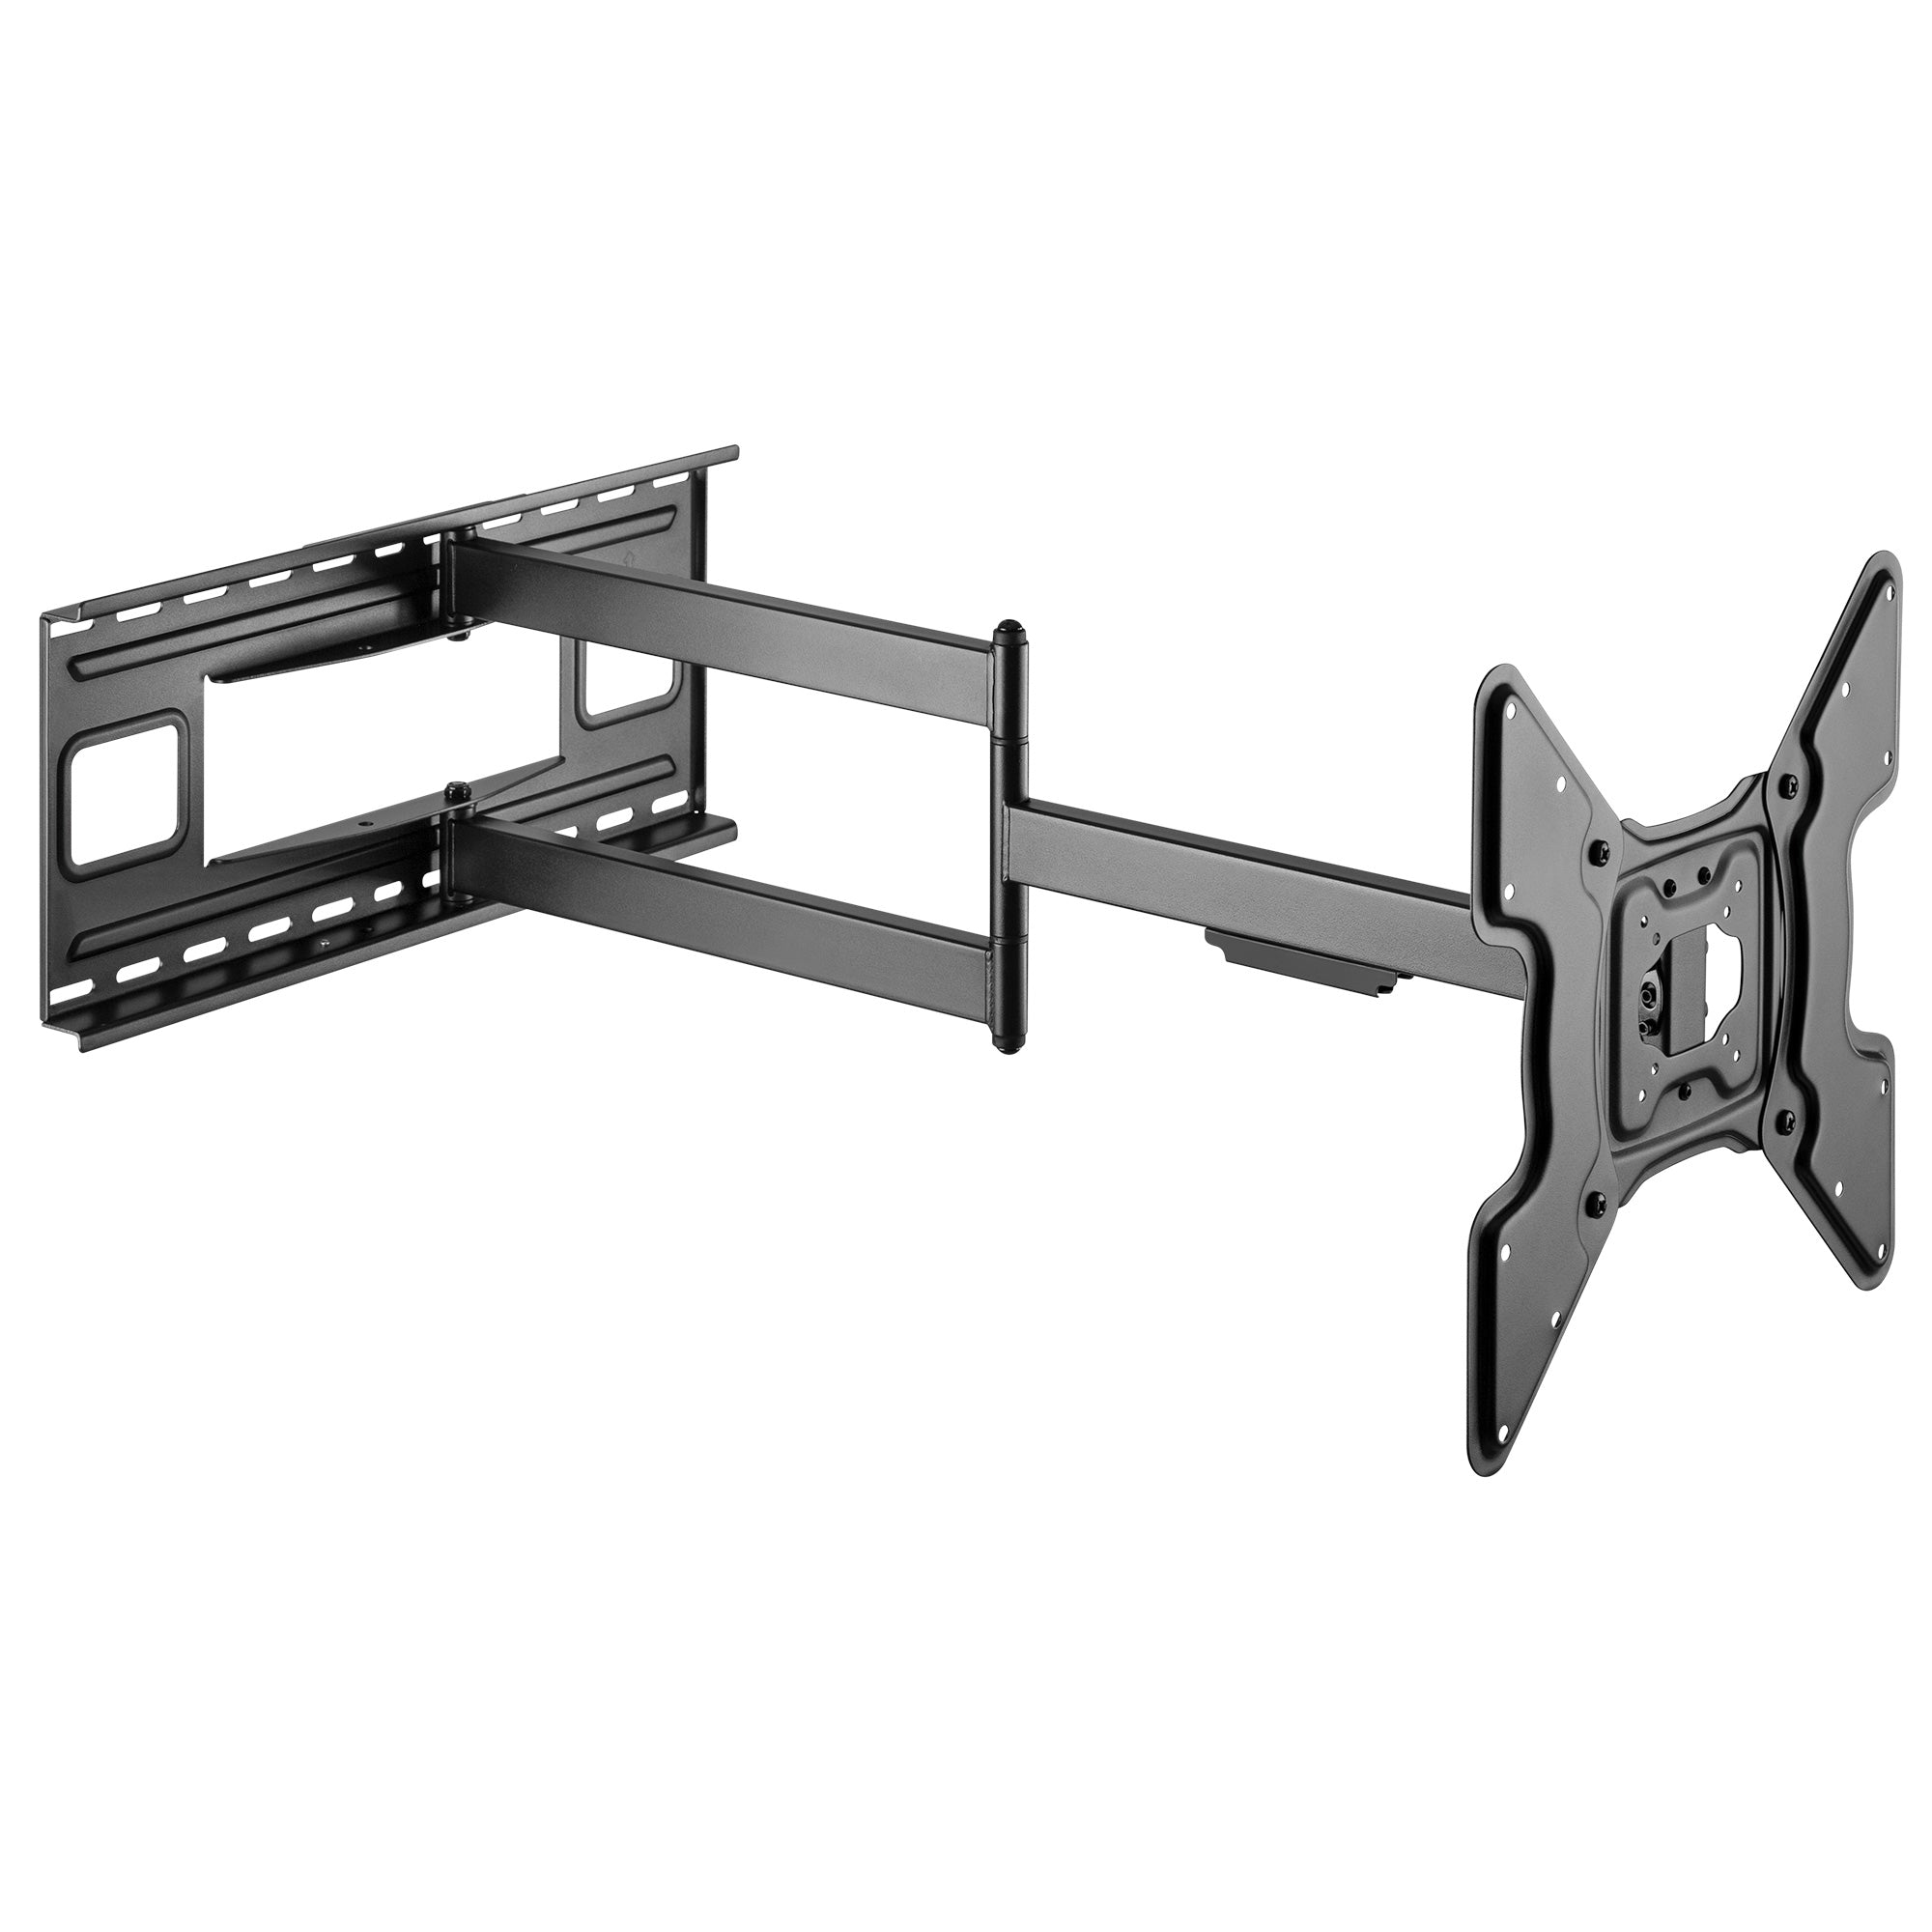 Full Motion Wall Mount with 40-inch Extension